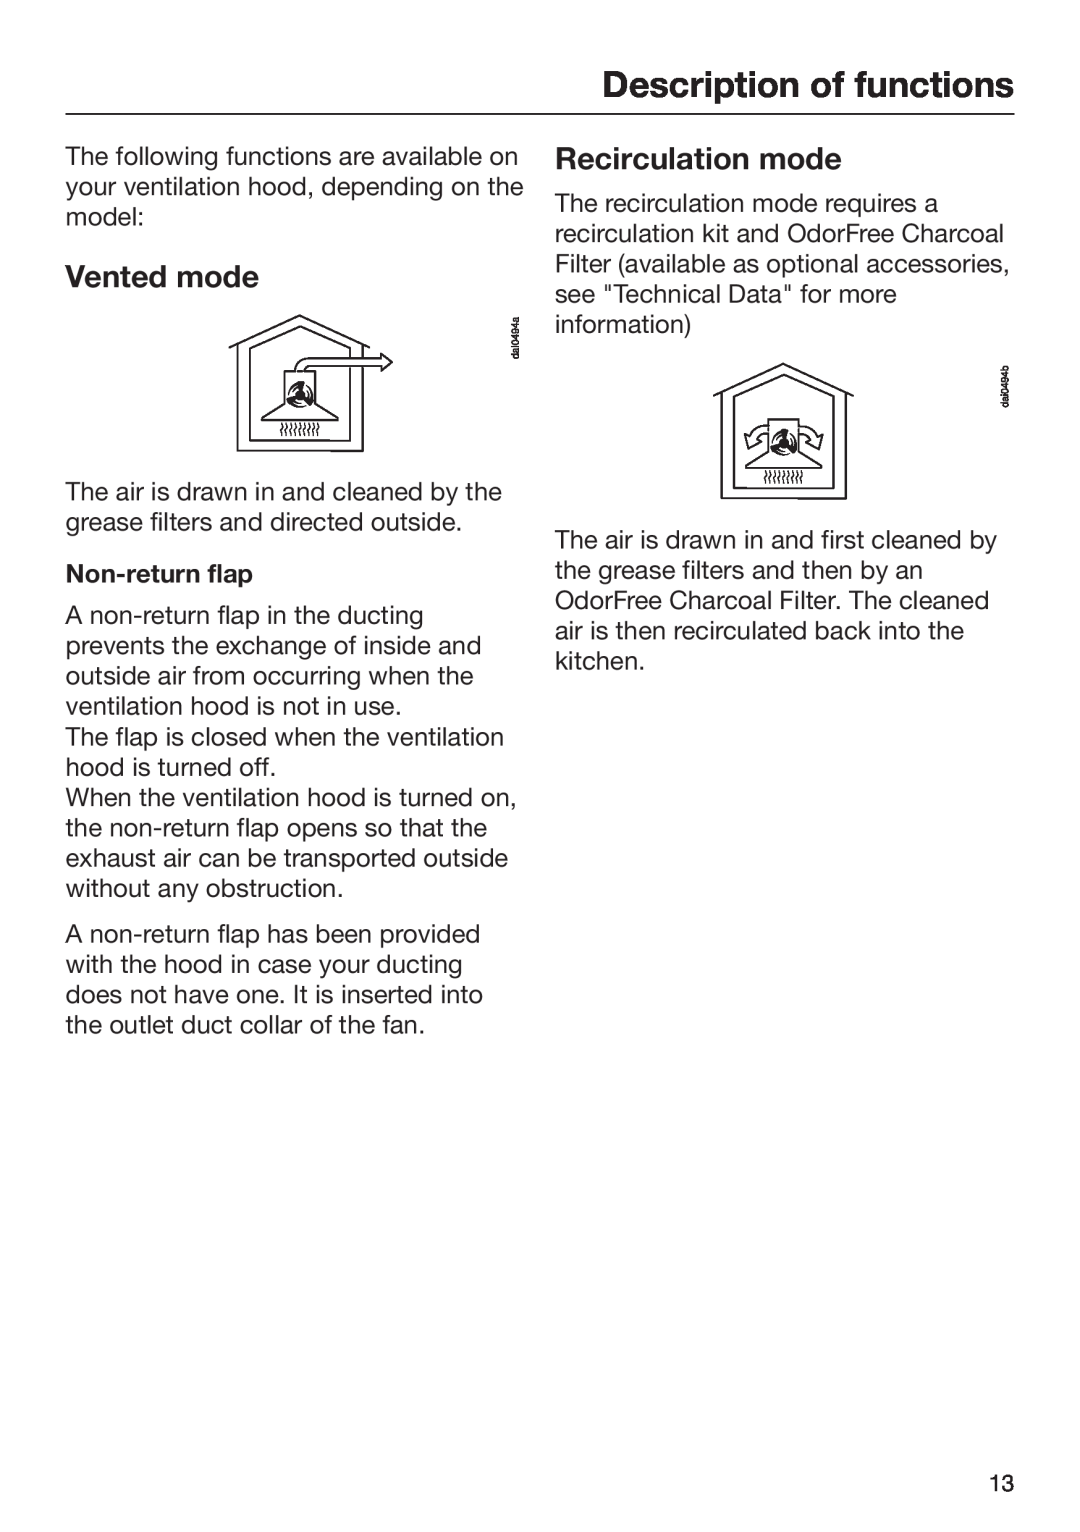 Miele 09 968 240 installation instructions Description of functions, Vented mode, Recirculation mode, Non-returnflap 